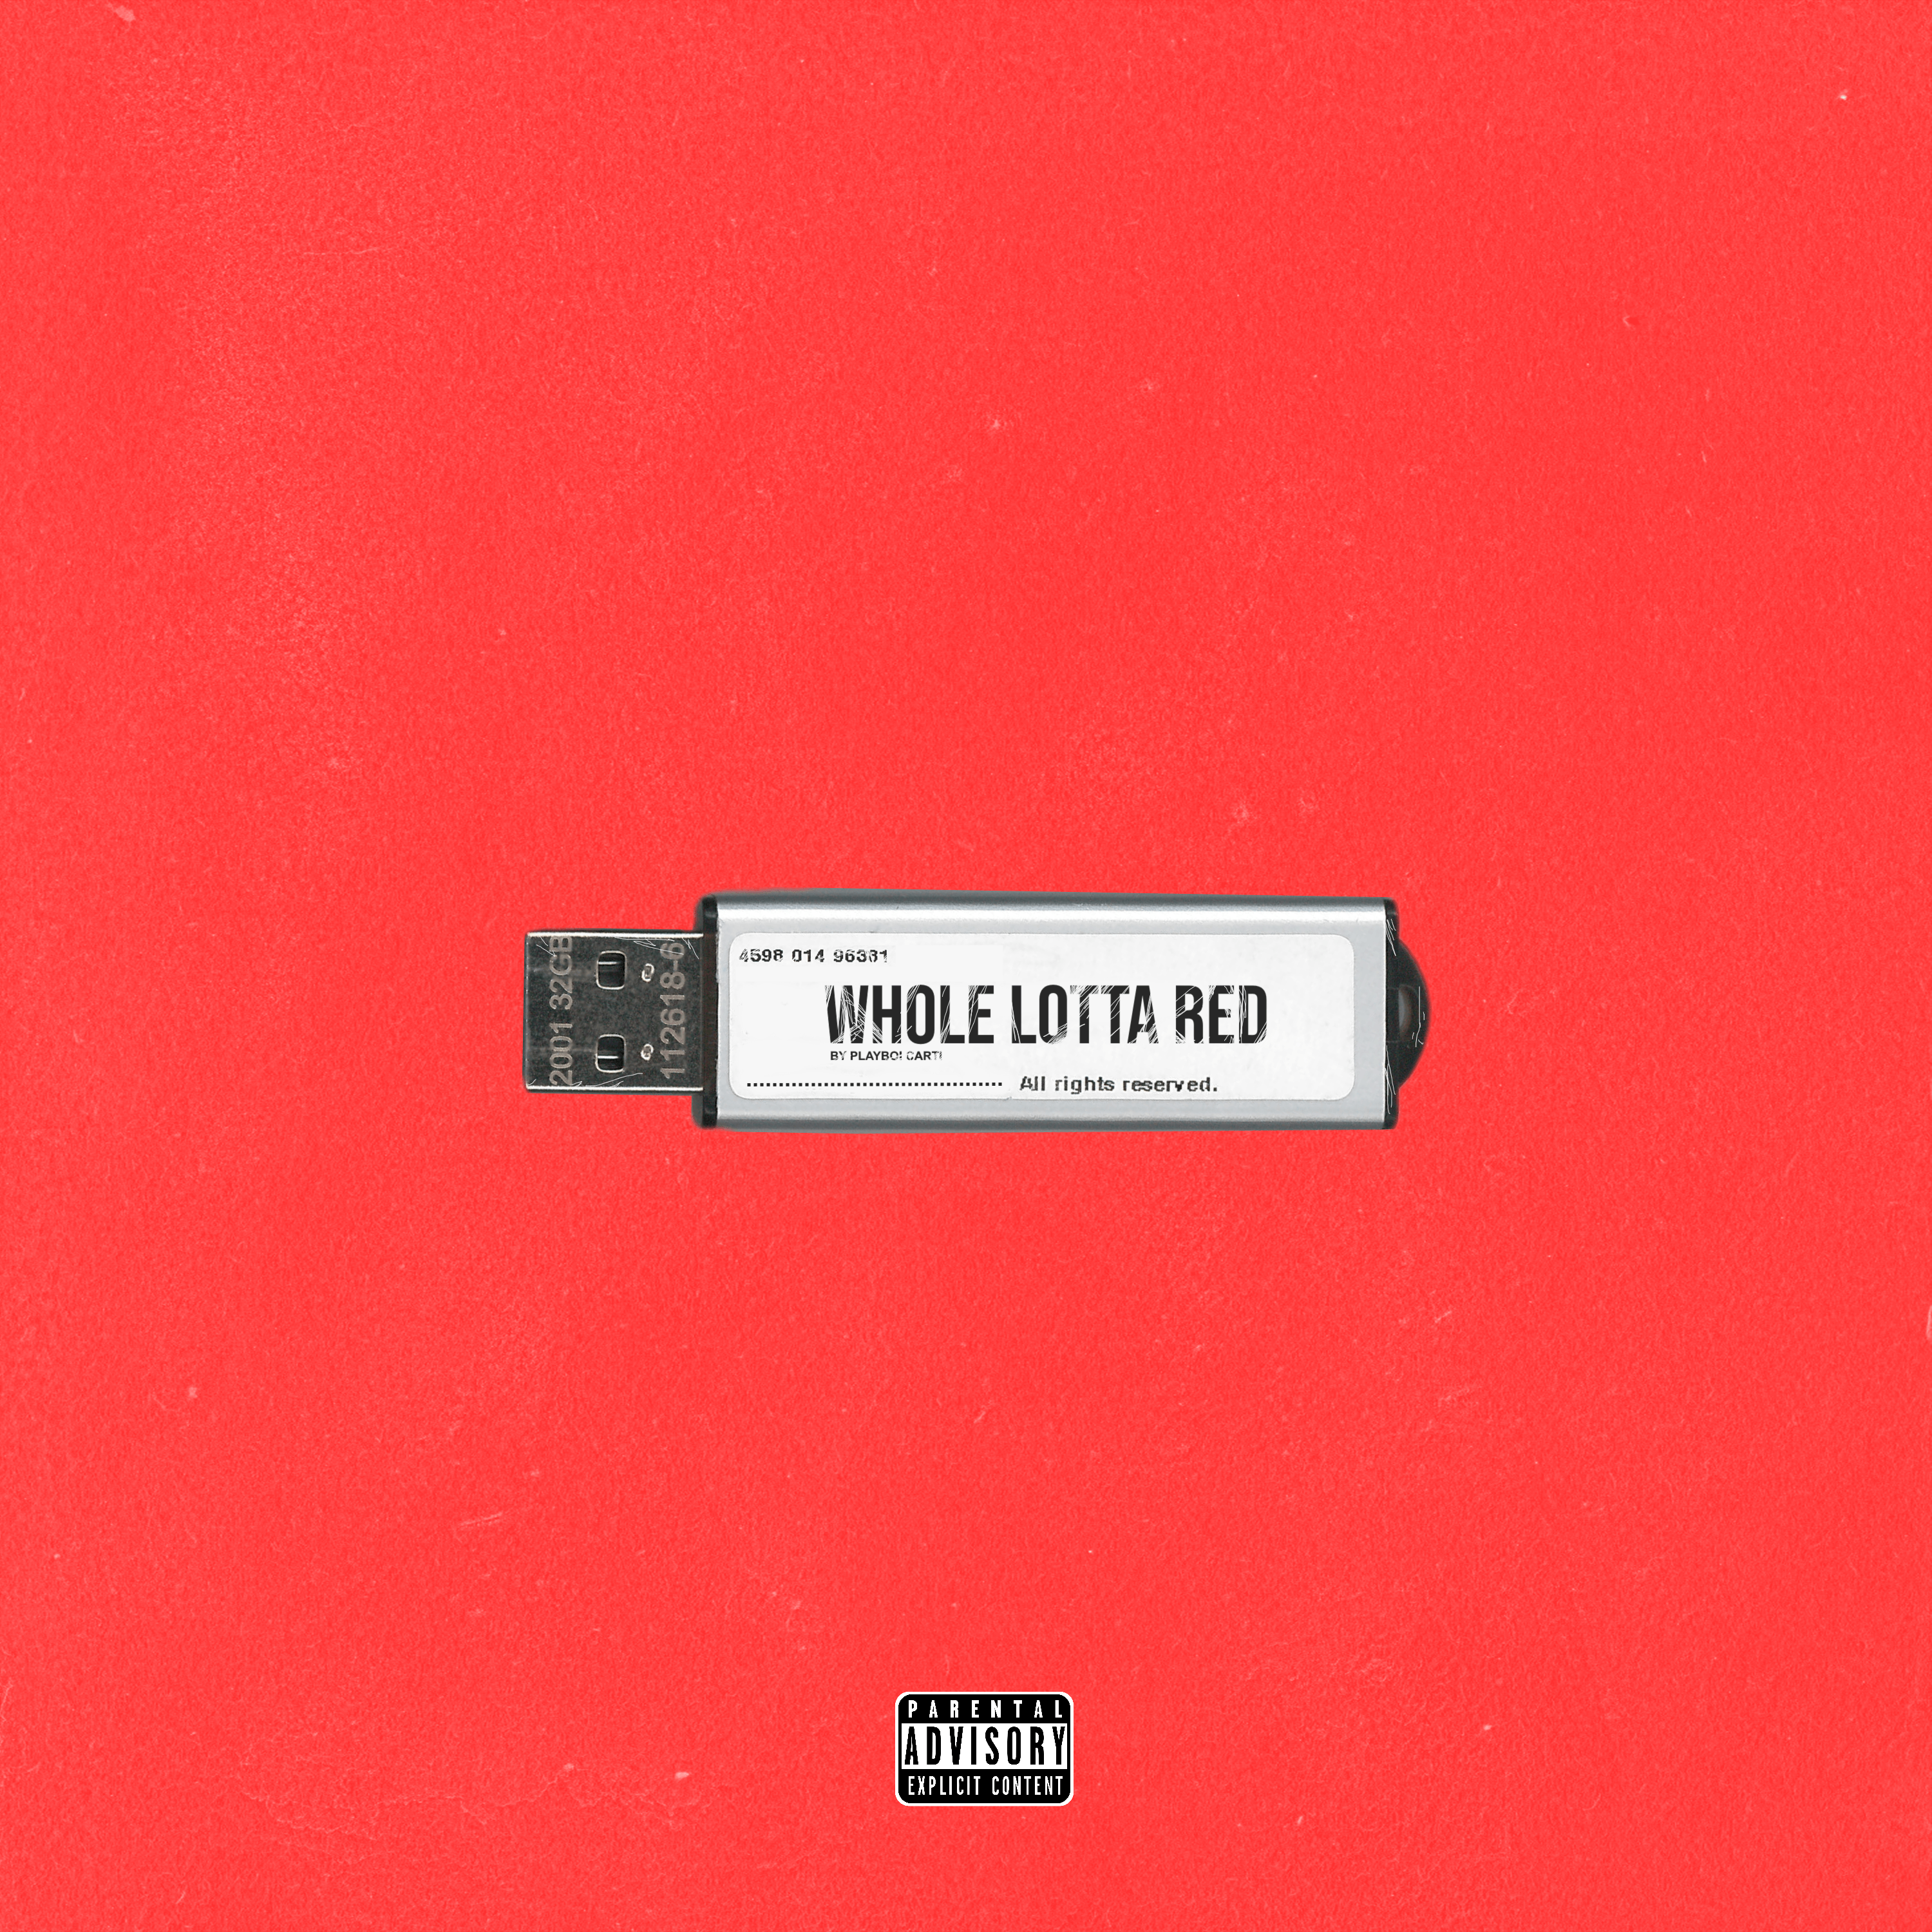 Art I made for Whole Lotta Red